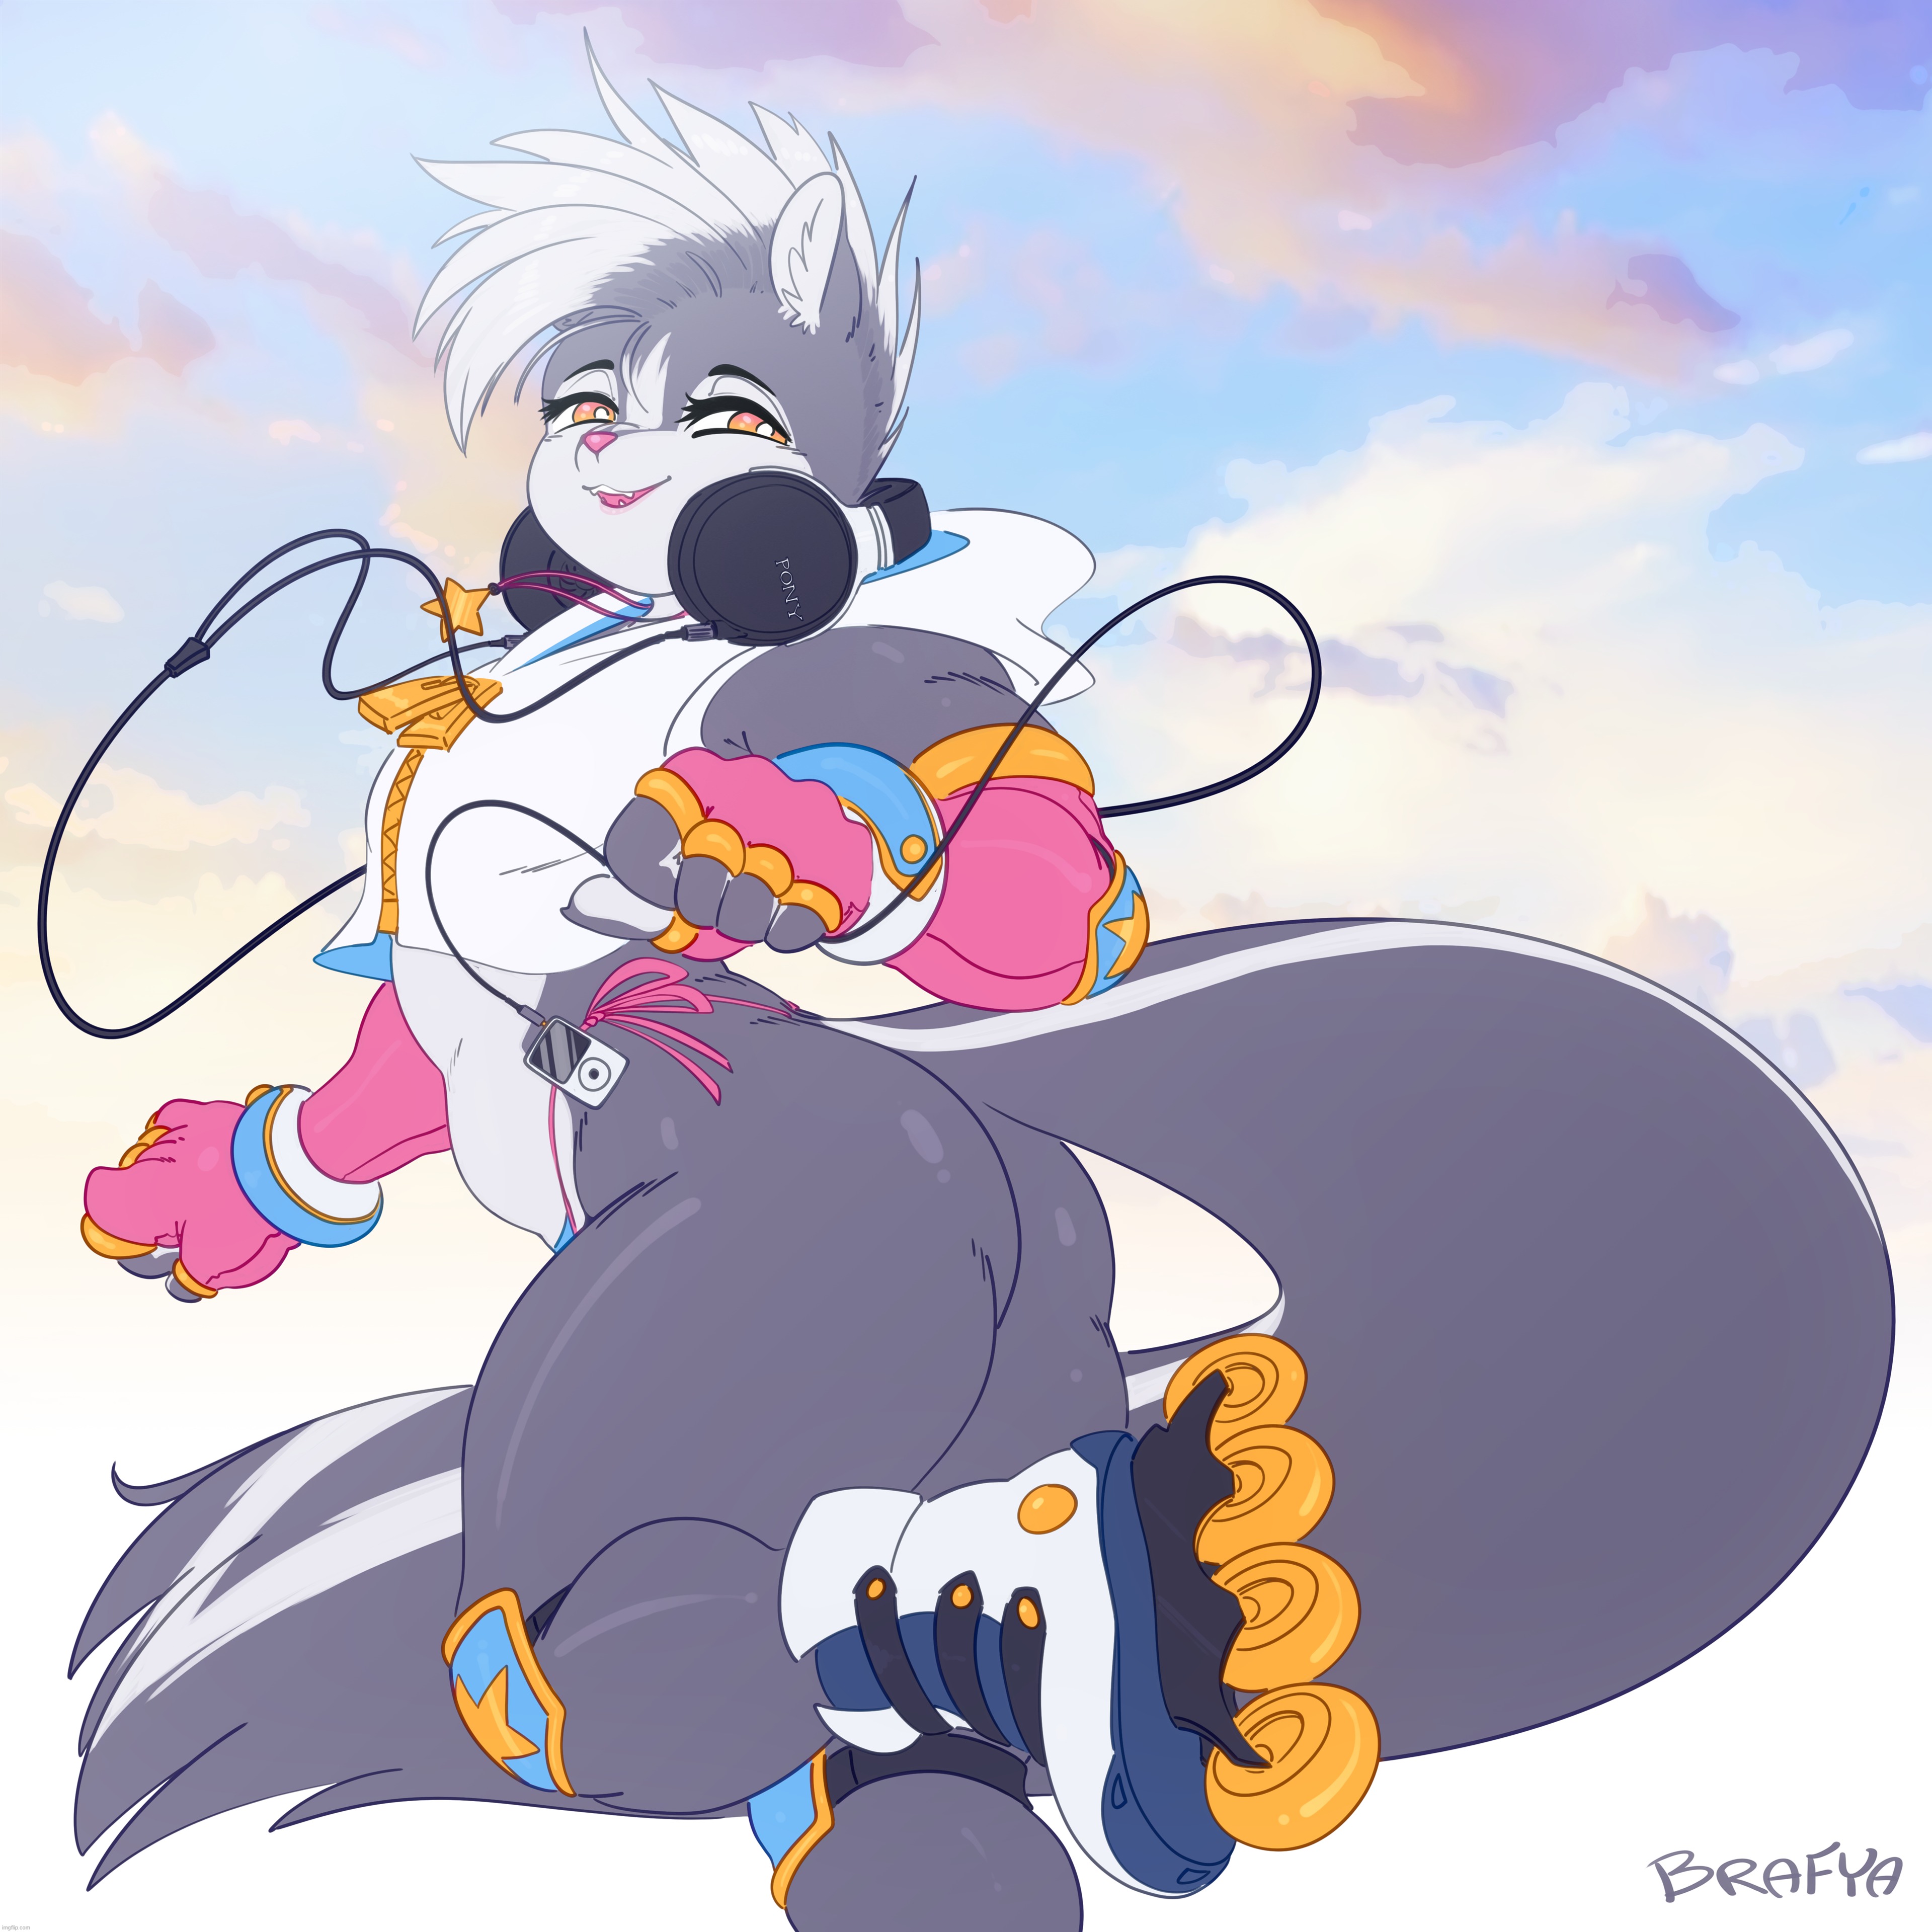 By Brafya | image tagged in furry,femboy,cute,adorable,dat ass,thicc | made w/ Imgflip meme maker